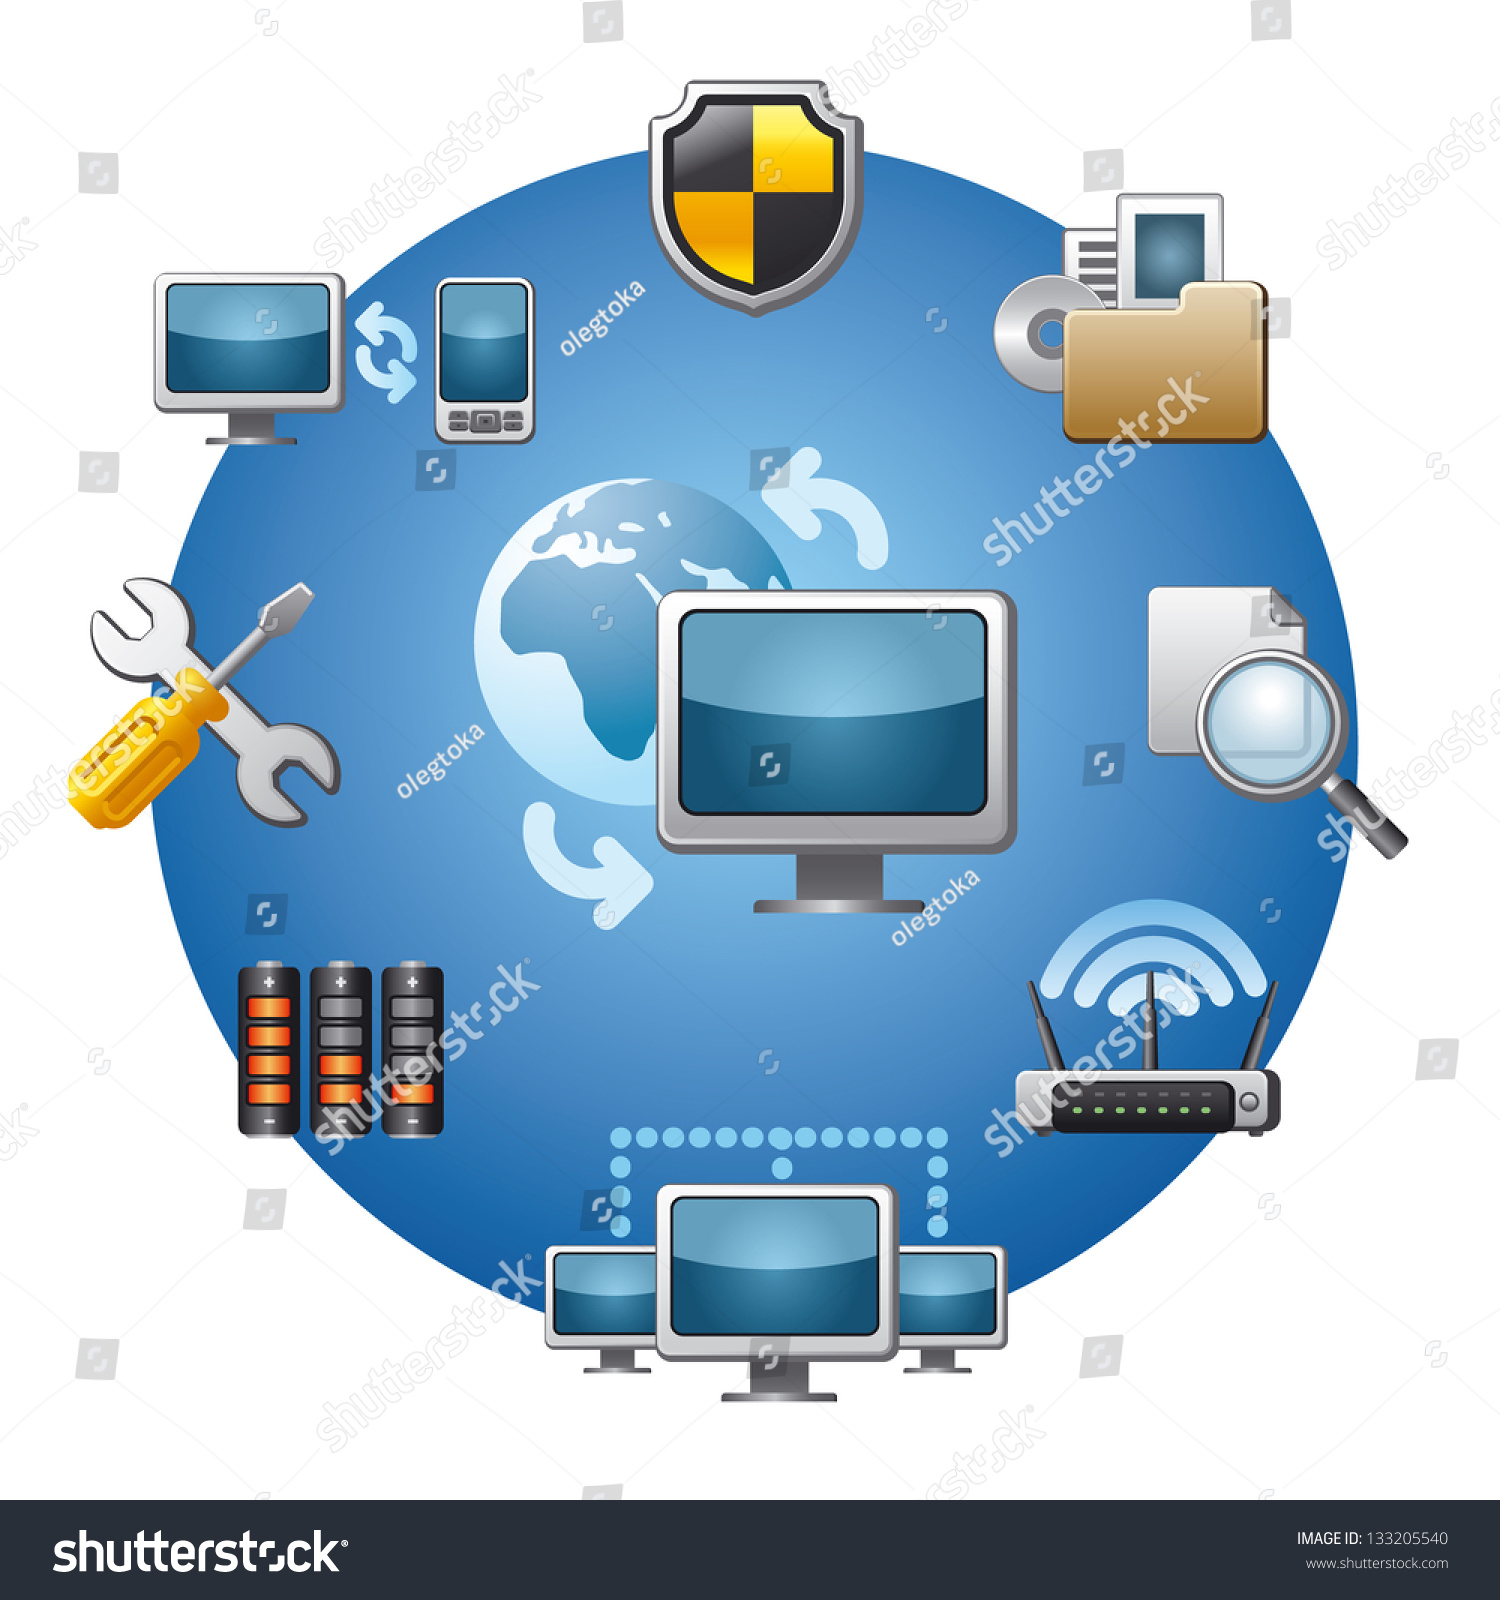 computer network clipart - photo #28